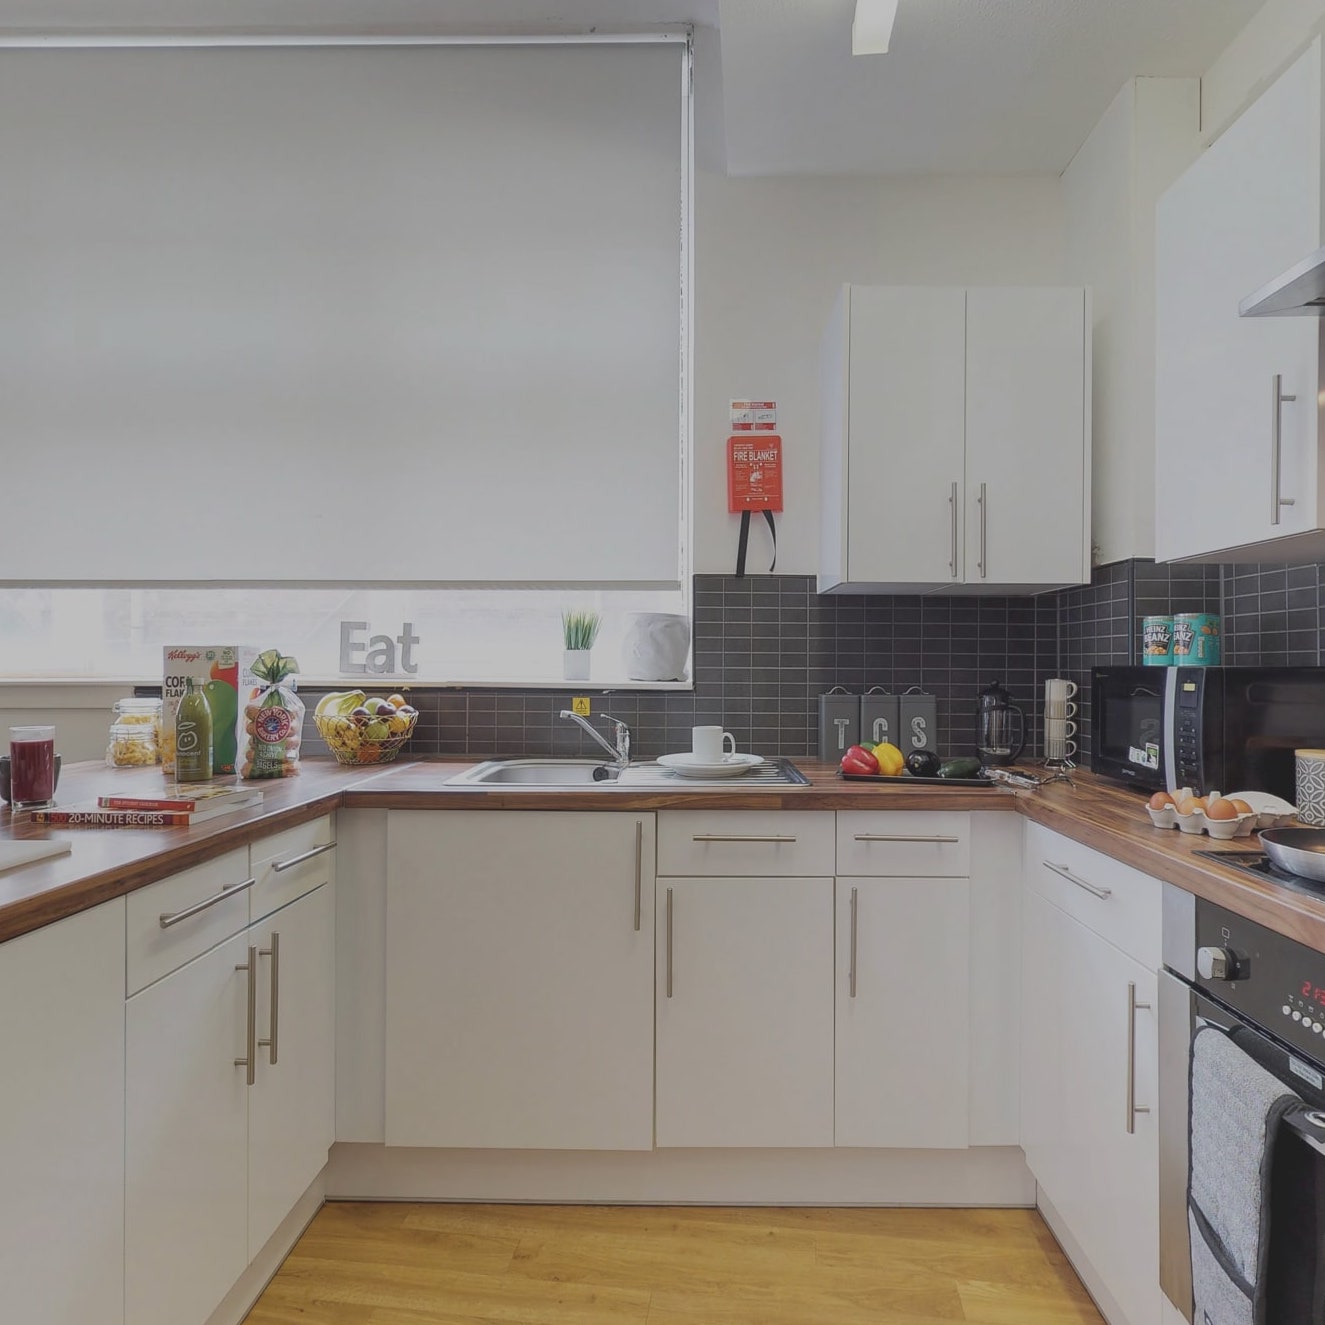 Kitchen and living area at Haigh Court student accommodation